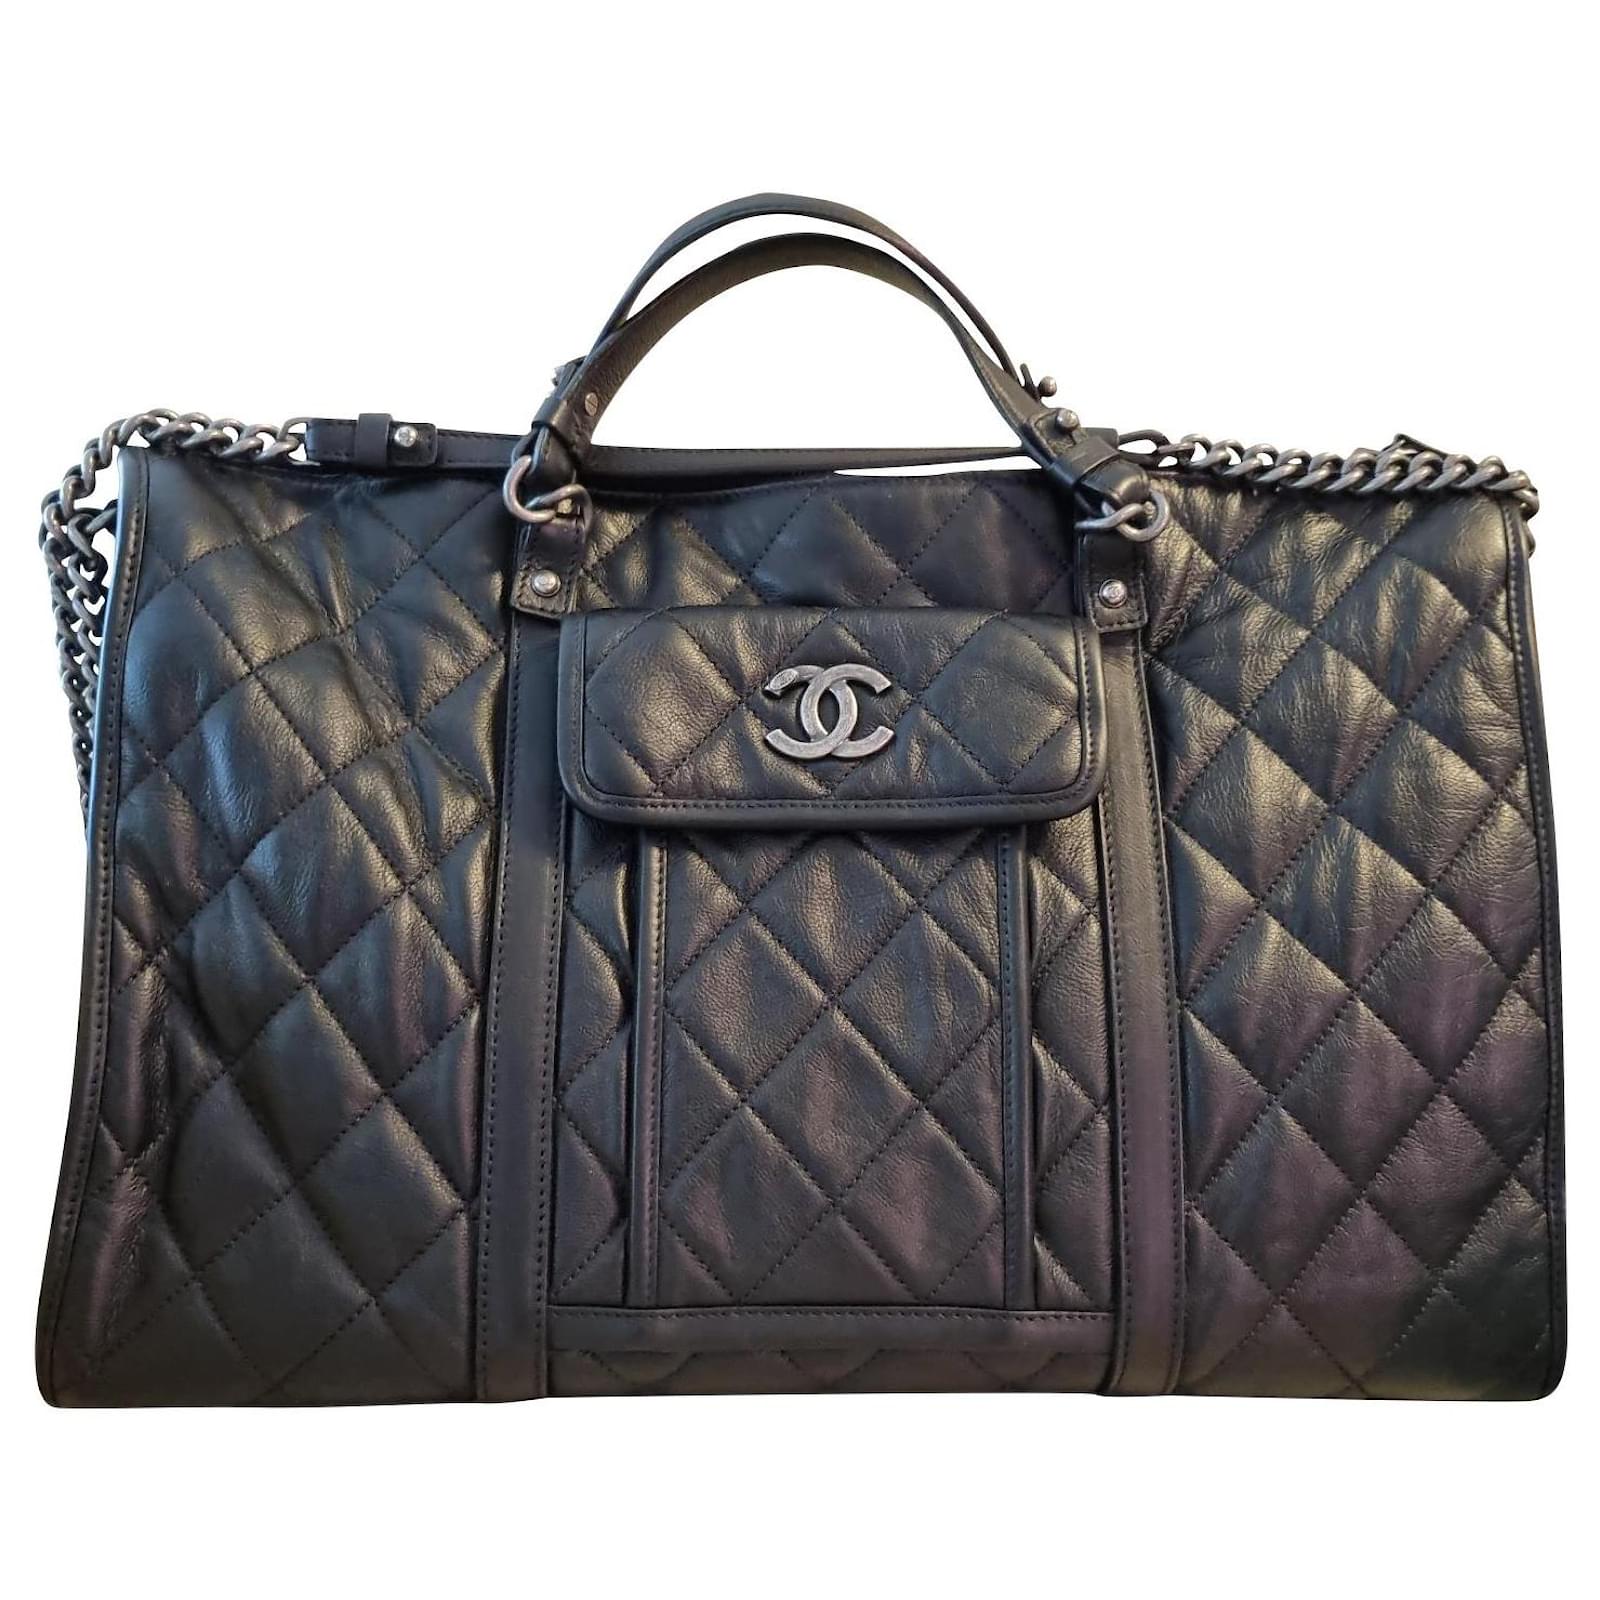 CHANEL, Bags, Chanel Black And Ivory Bowling Bag